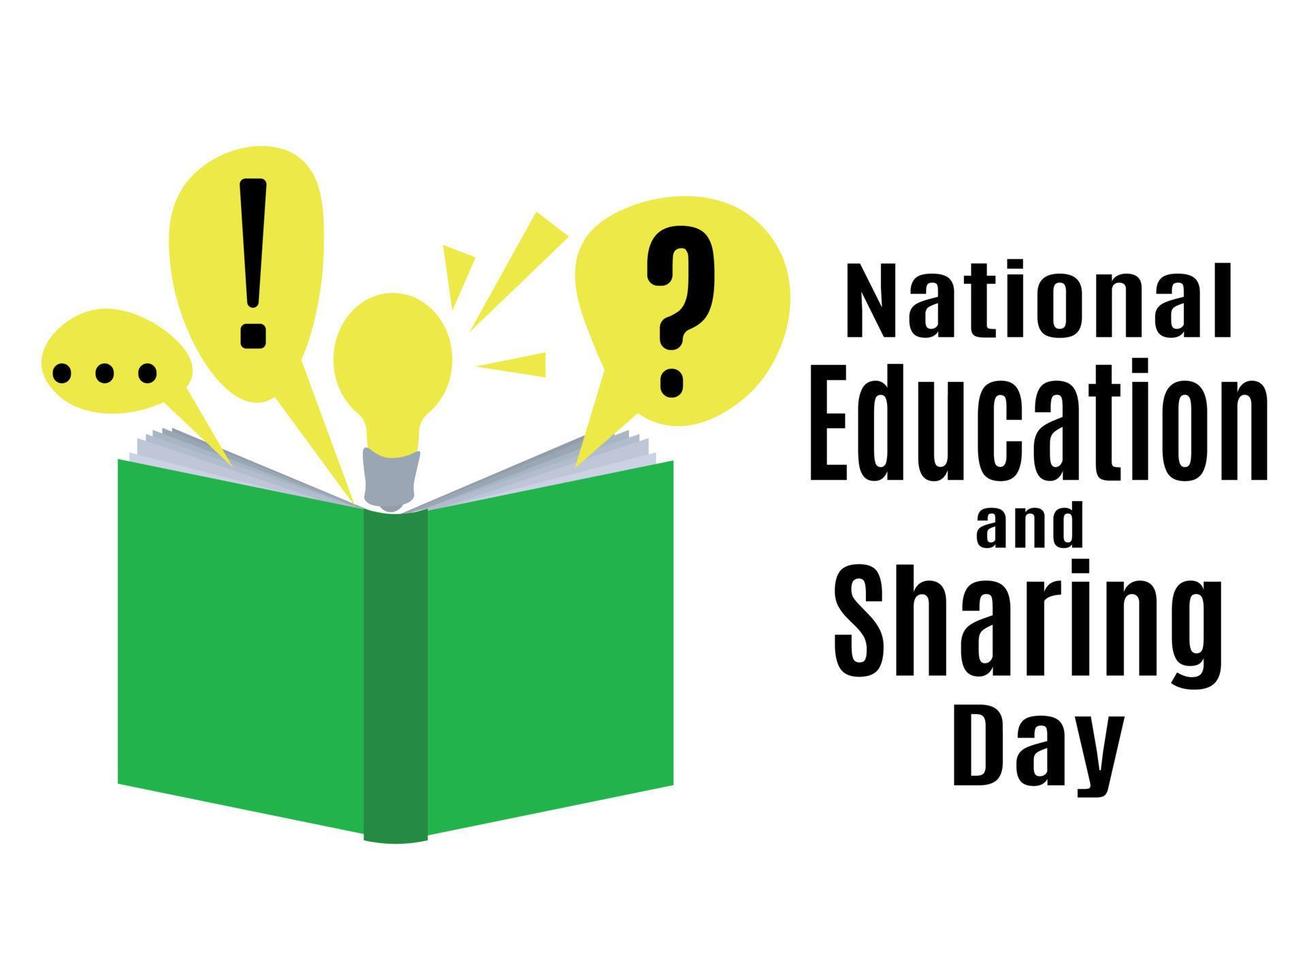 National Education and Sharing Day, idea for poster, banner, flyer, card design vector